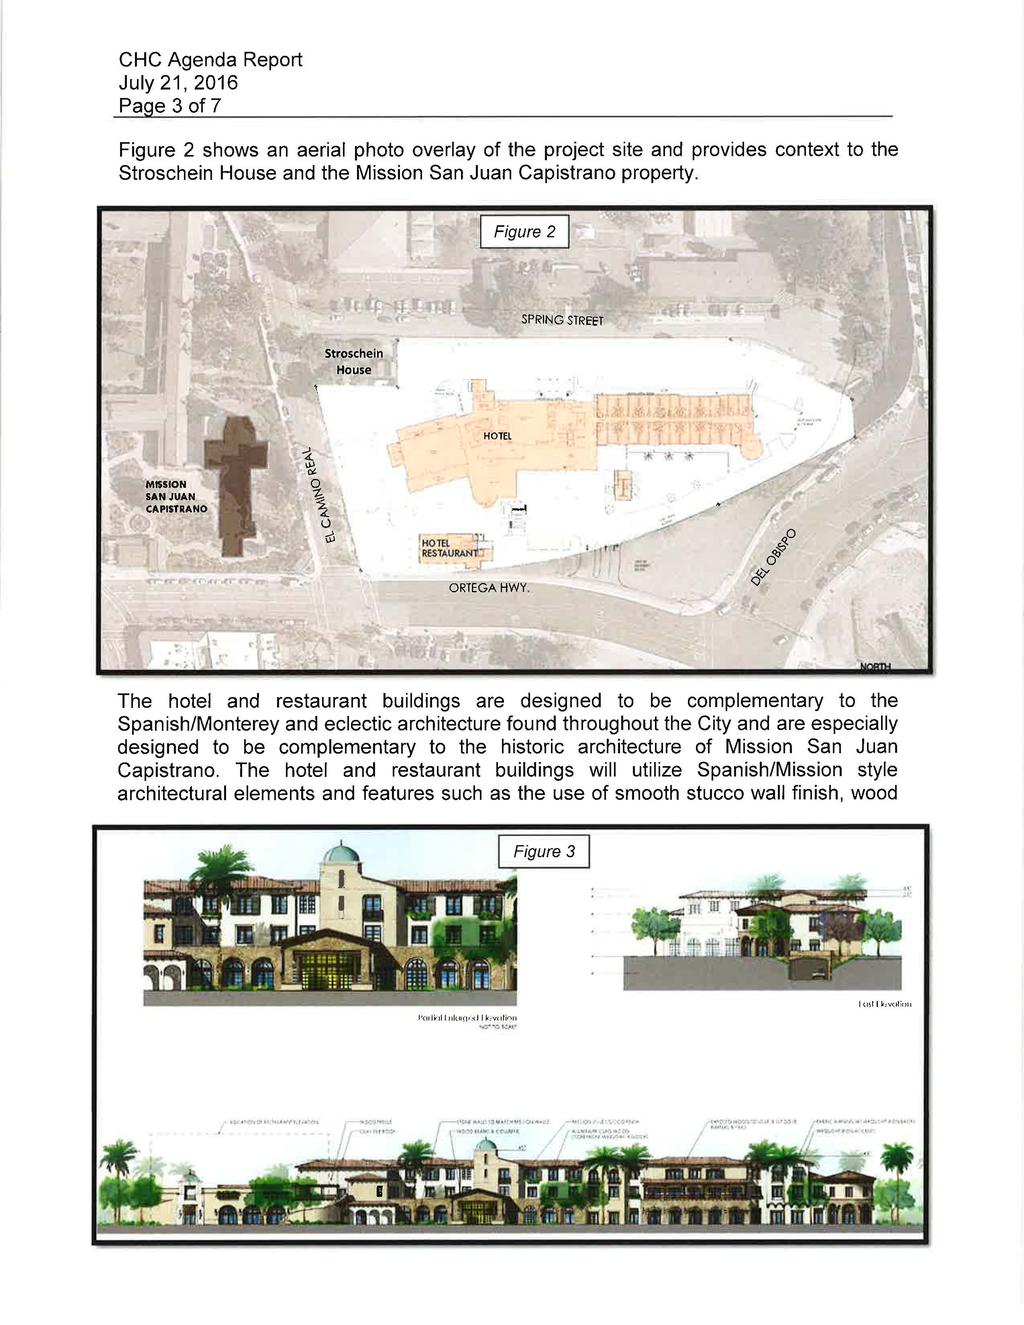 Page 3 of 7 Figure 2 shows an aerial photo overlay of the project site and provides context to the Stroschein House and the Mission San Juan Capistrano property.